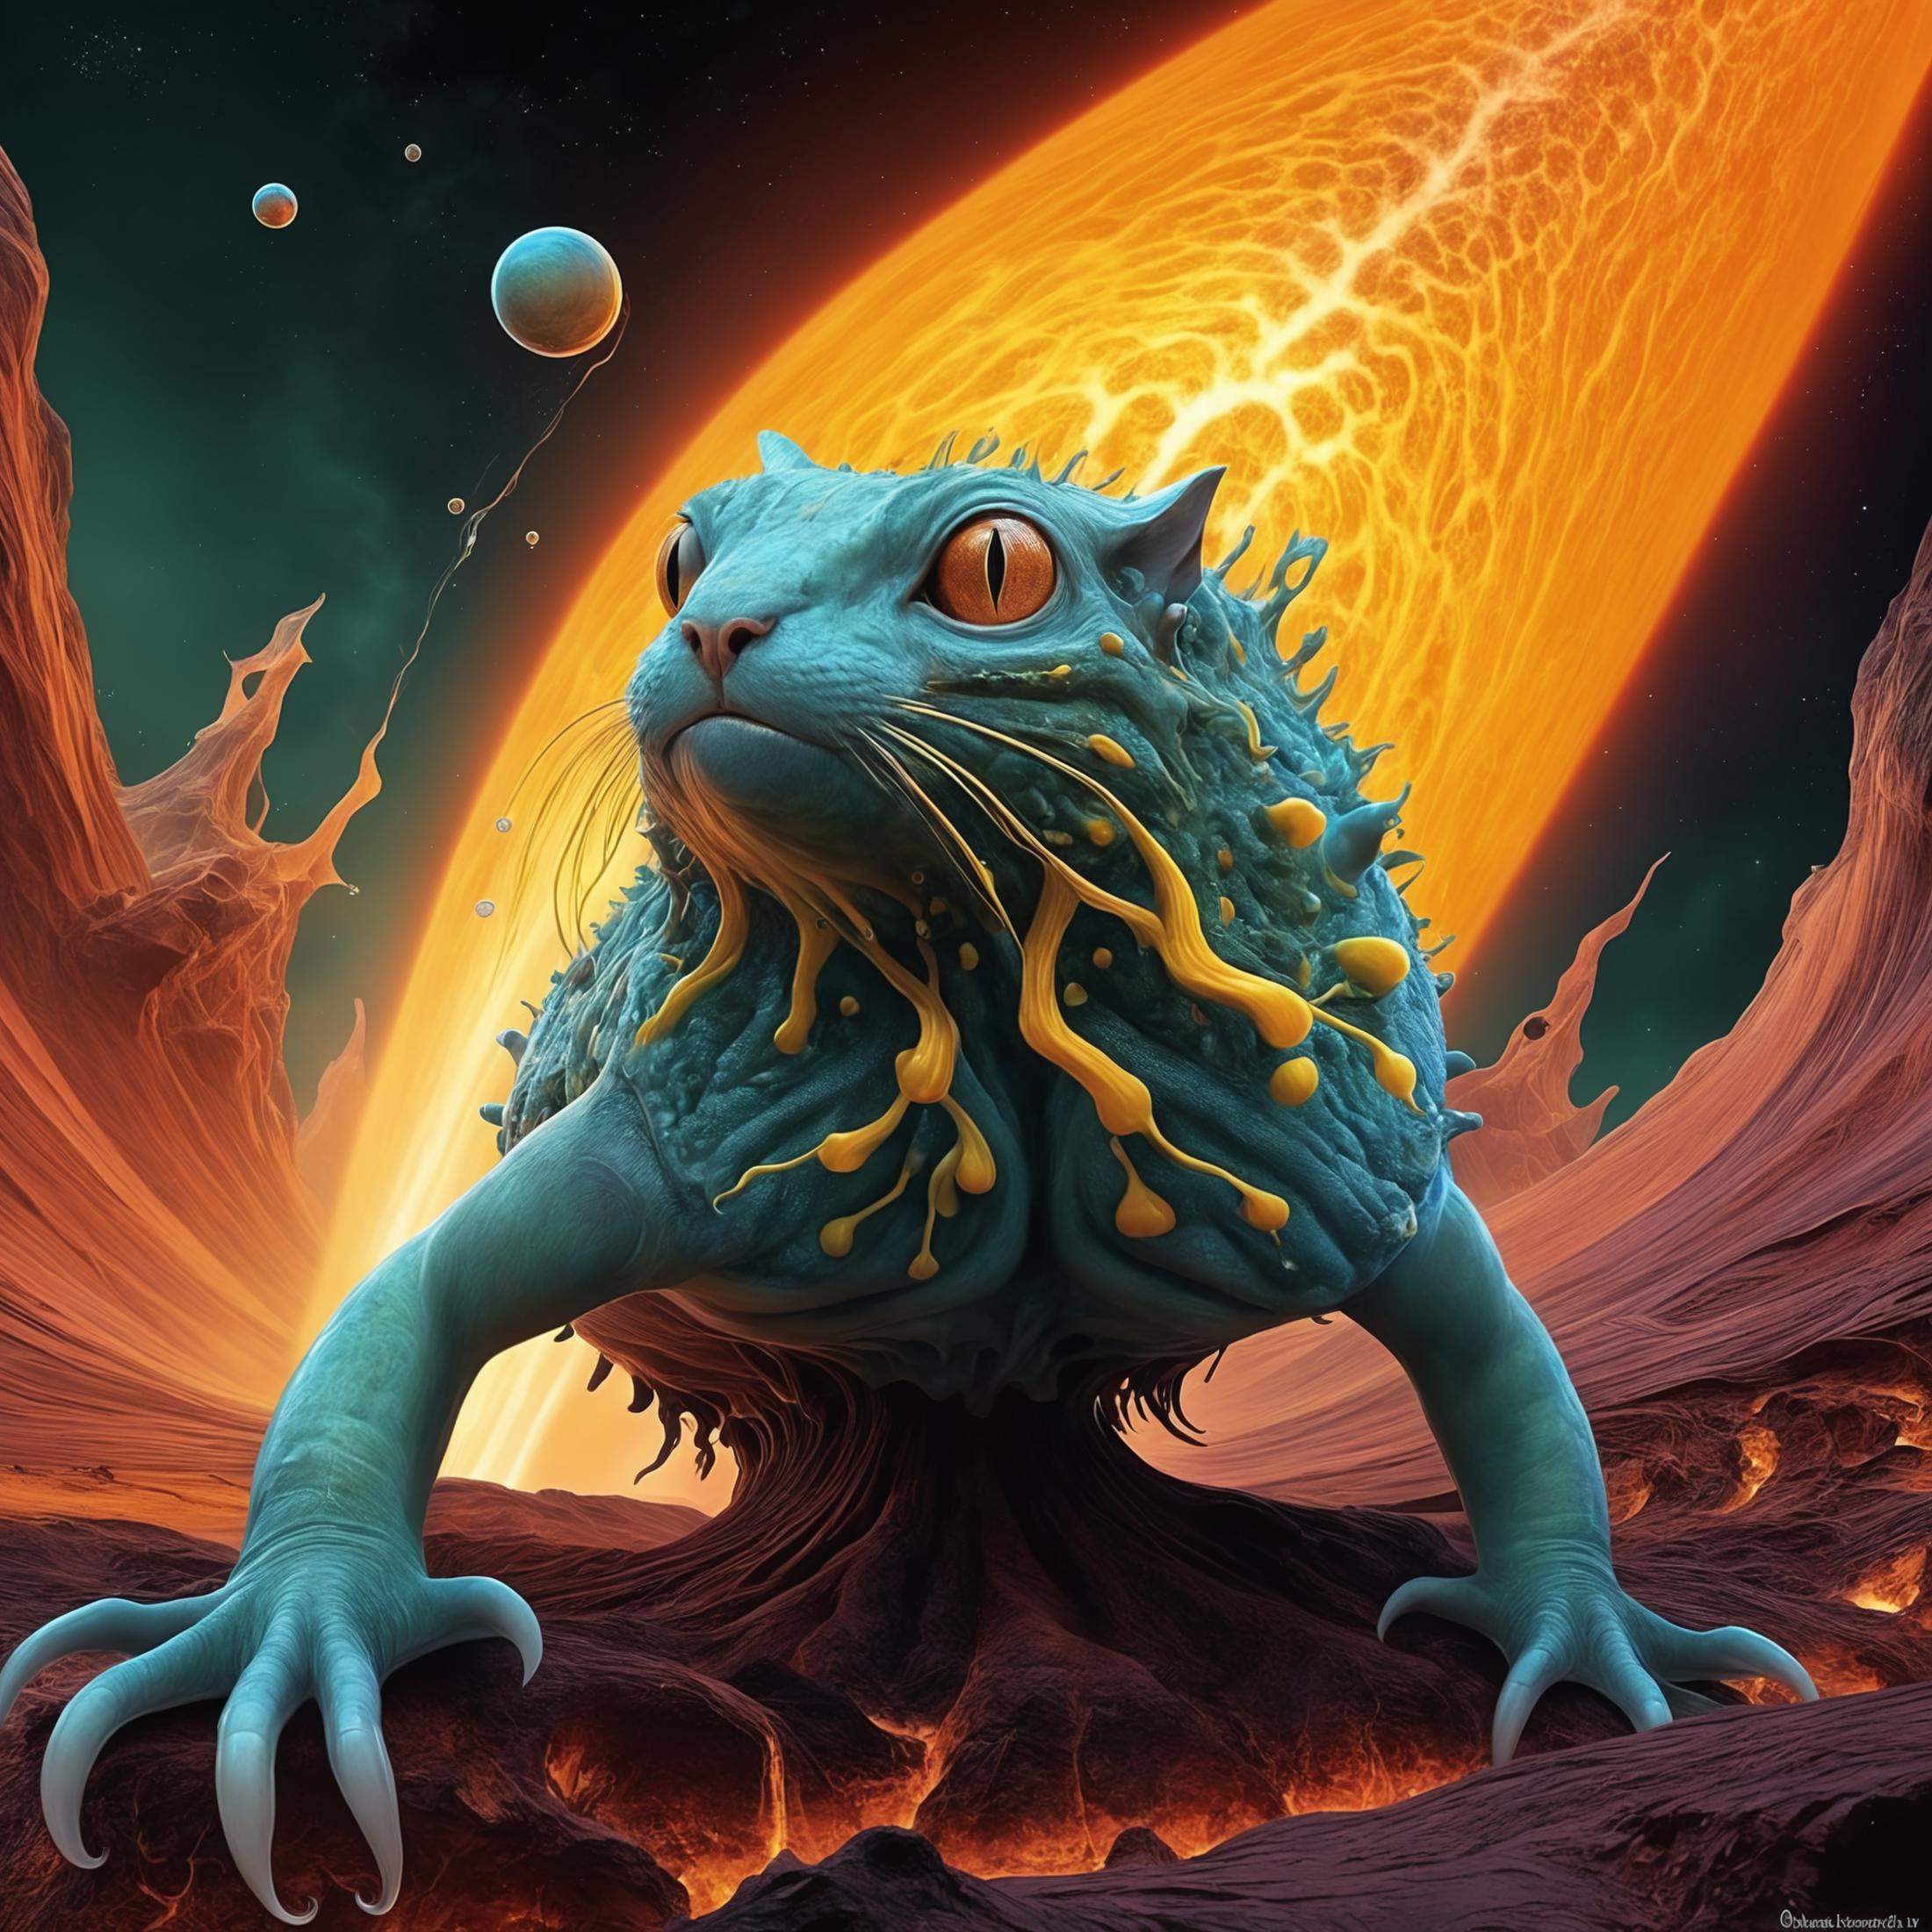 A blue, mutated cat with yellow eyes, sitting on a rock with a small planet in the background.